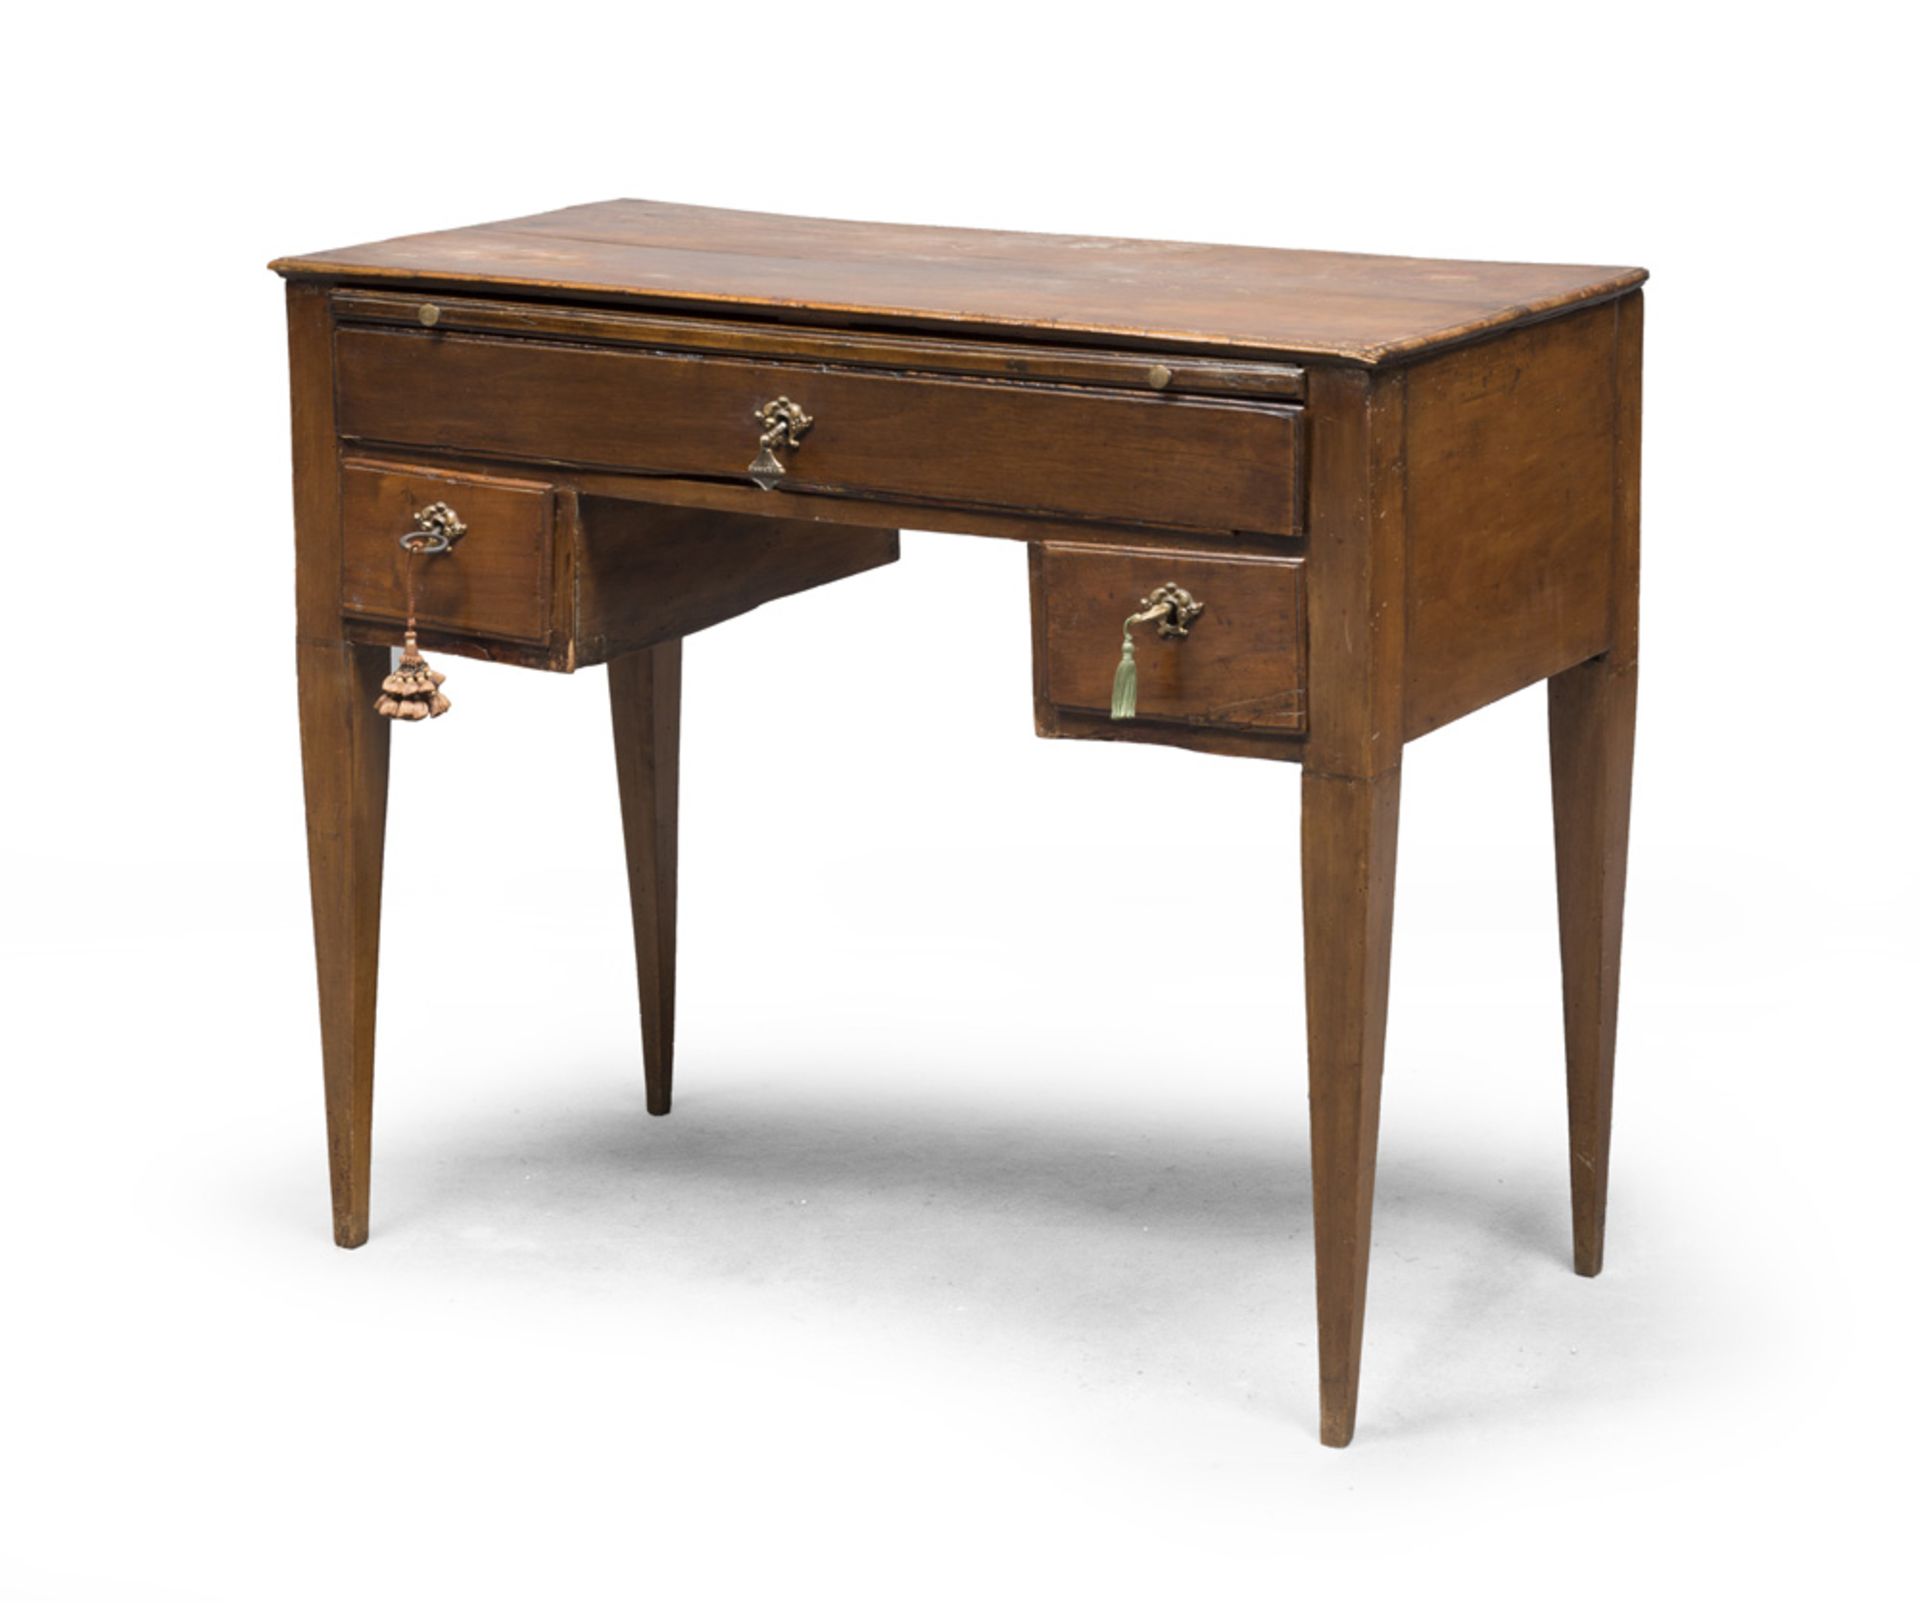 SMALL WRITING DESK IN WALNUT, END 18TH CENTURY three drawers and one leaf on the front. Obelisk